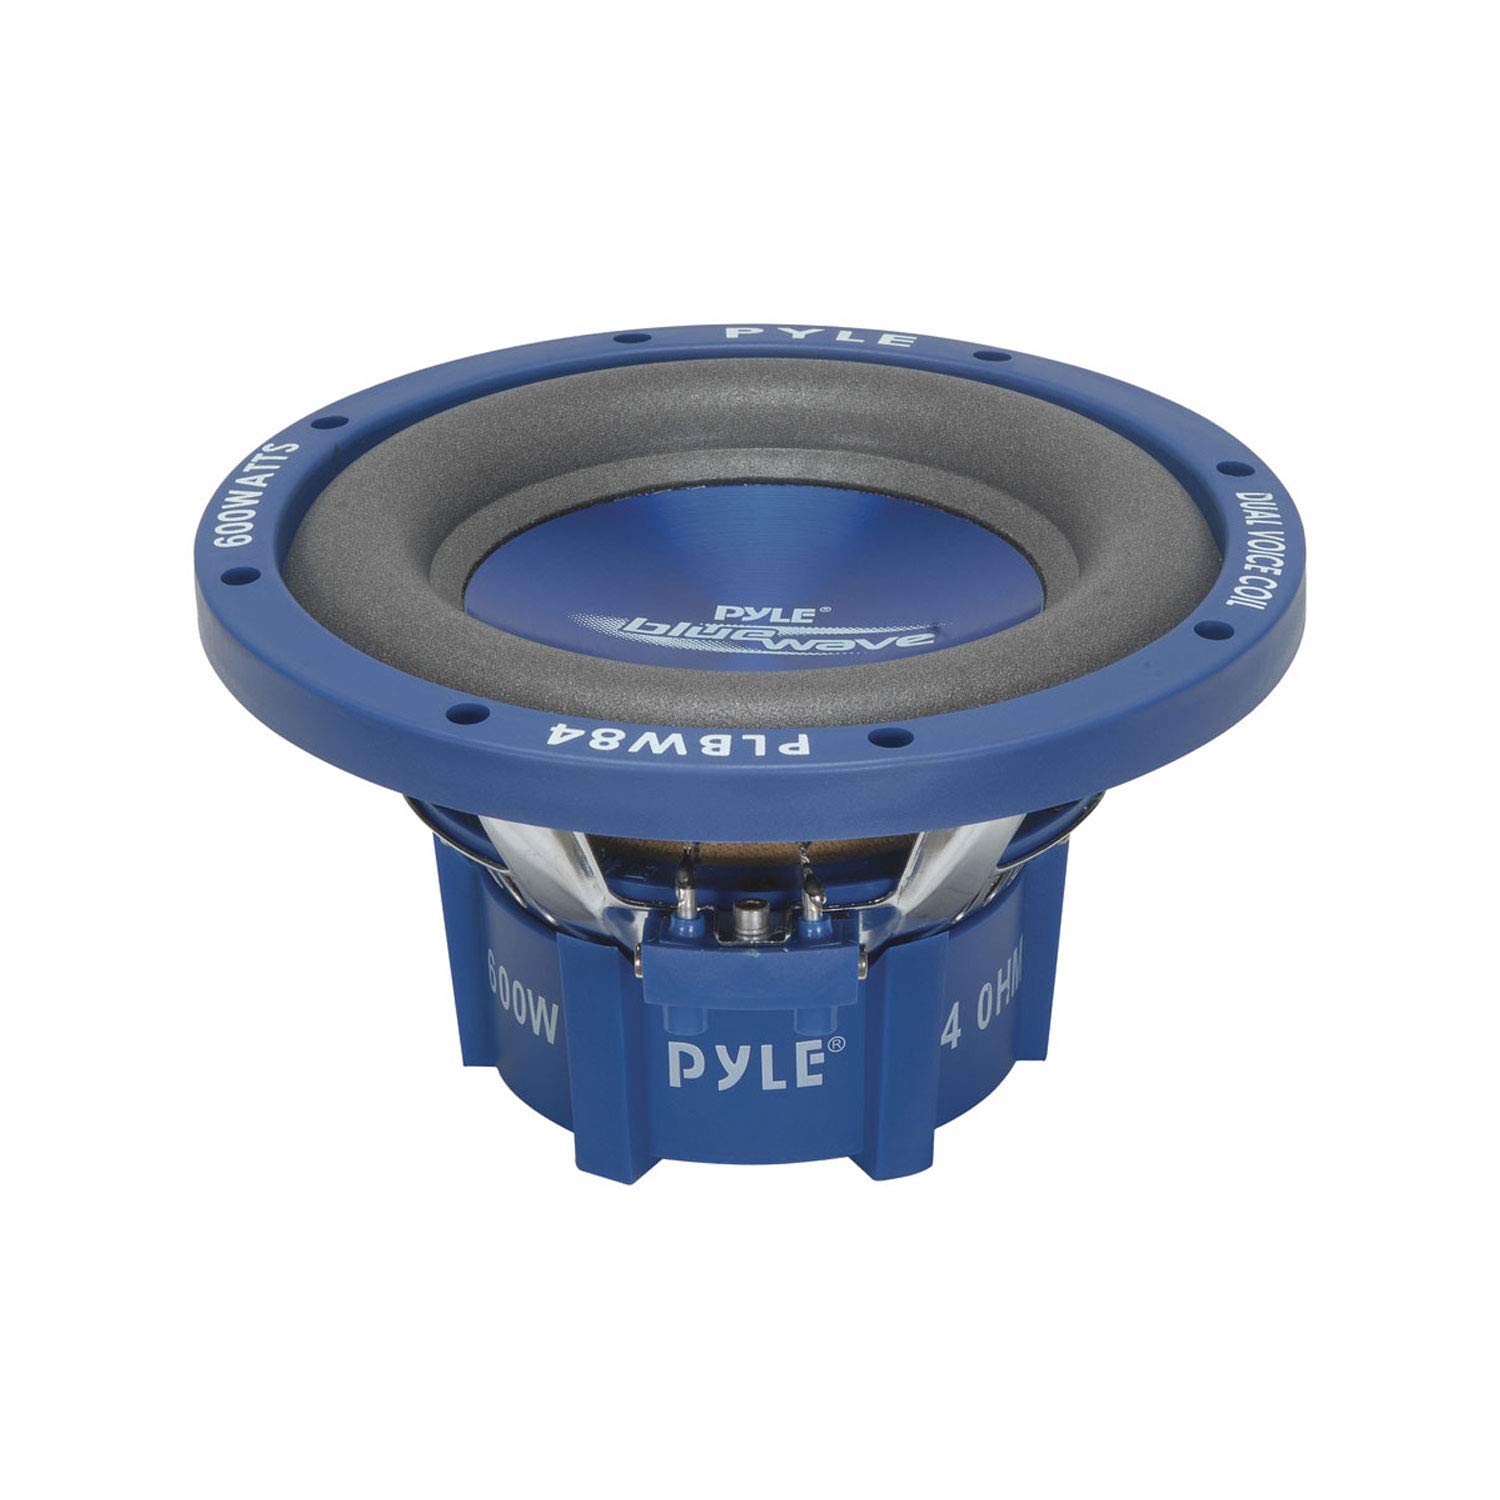 Pyle Car Vehicle Subwoofer Audio Speaker - 8 Inch Blue Injection Molded Cone, Blue Chrome-Plated Plastic Basket, Dual Voice Coil 4 Ohm Impedance, 600 Watt Power, Vehicle Stereo Sound System PLBW84